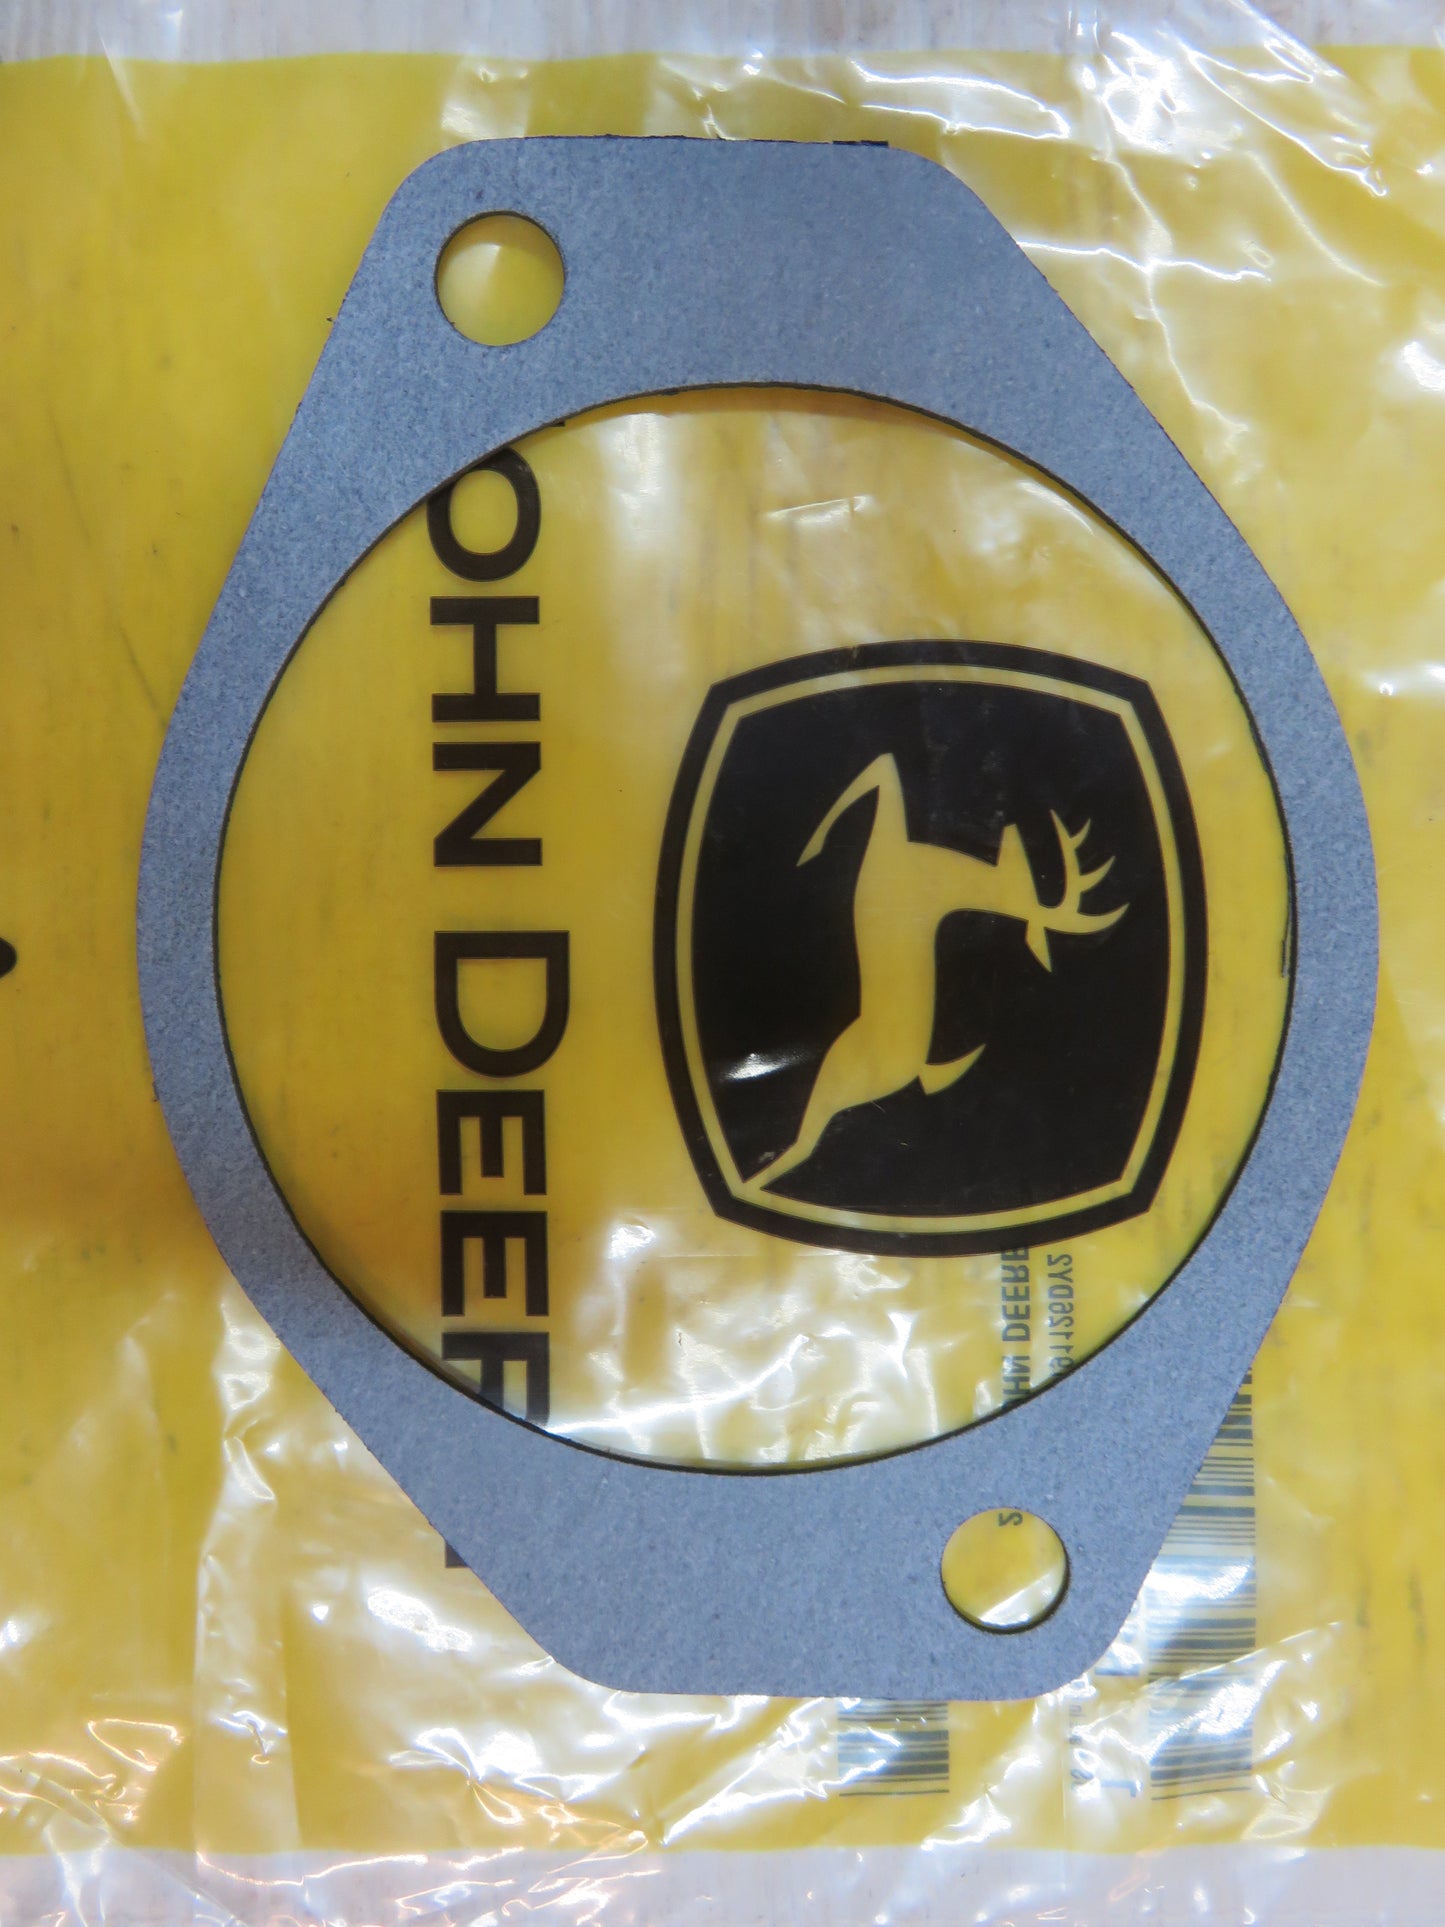 R123676 John Deere Auxiliary Drive Gasket For 5105, 6140, 6145, 6150, 6155, 6170